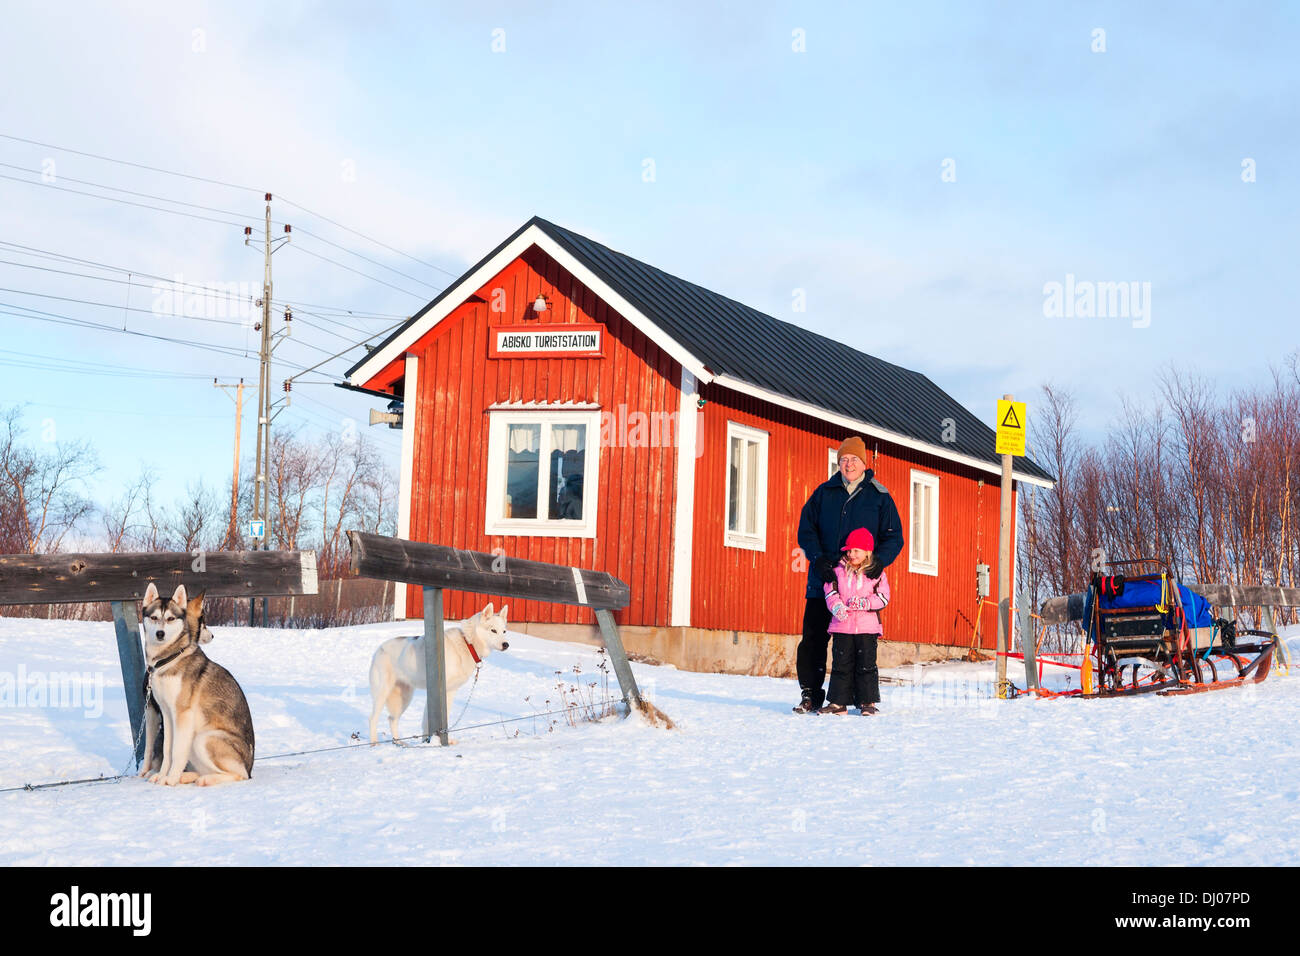 Man and child watching sled dogs outside the Abisko train station in arctic Sweden Stock Photo